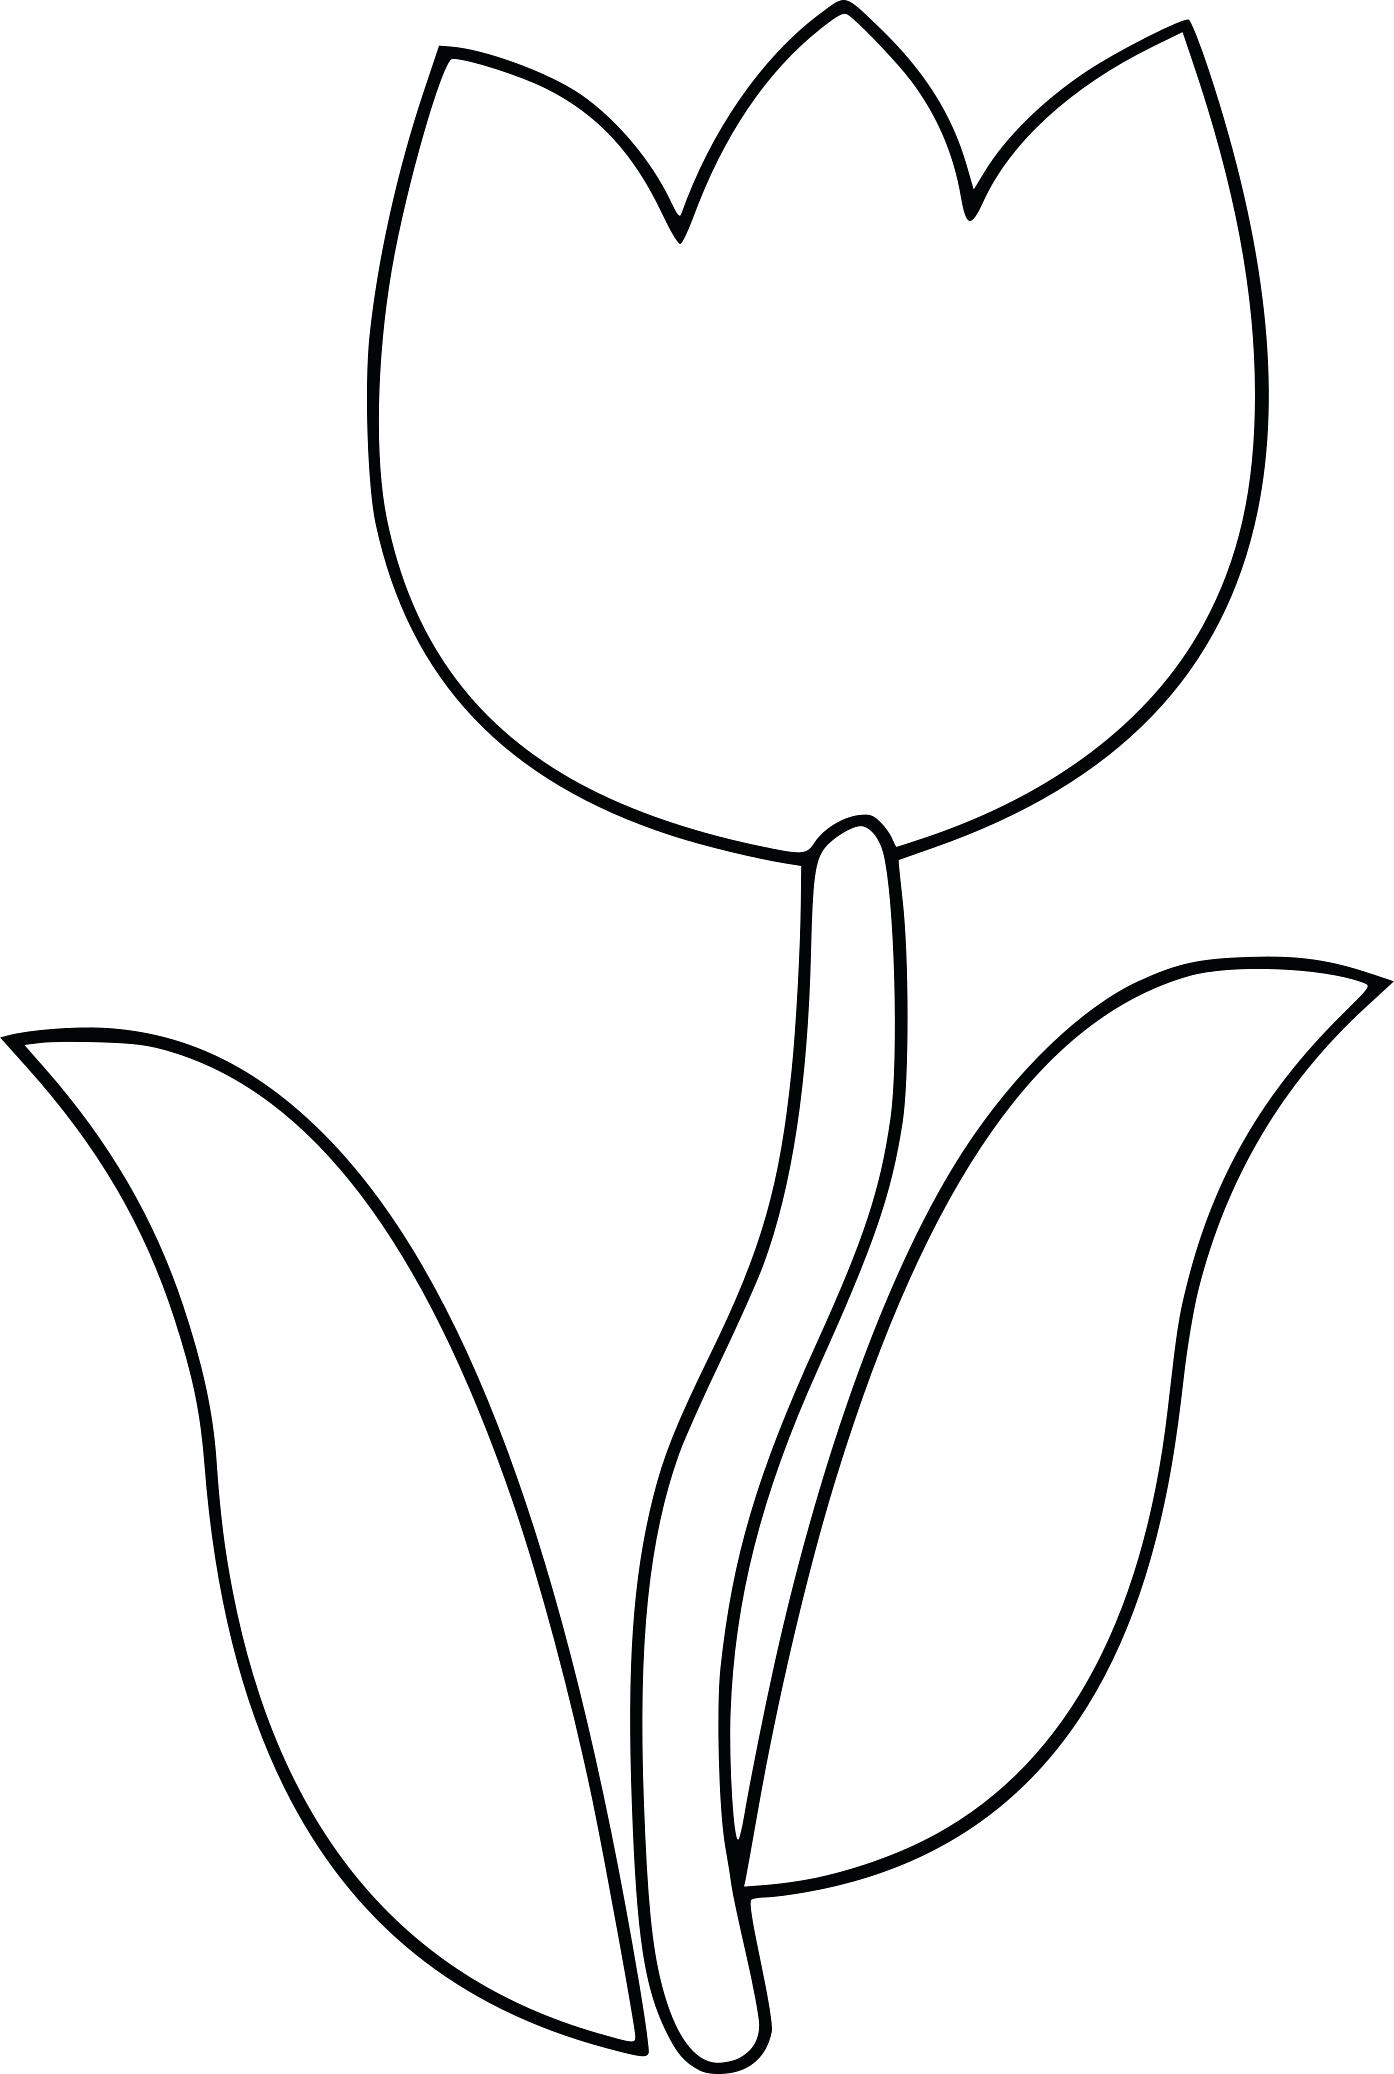 Four Leaf Clover Coloring Page at GetDrawings | Free download